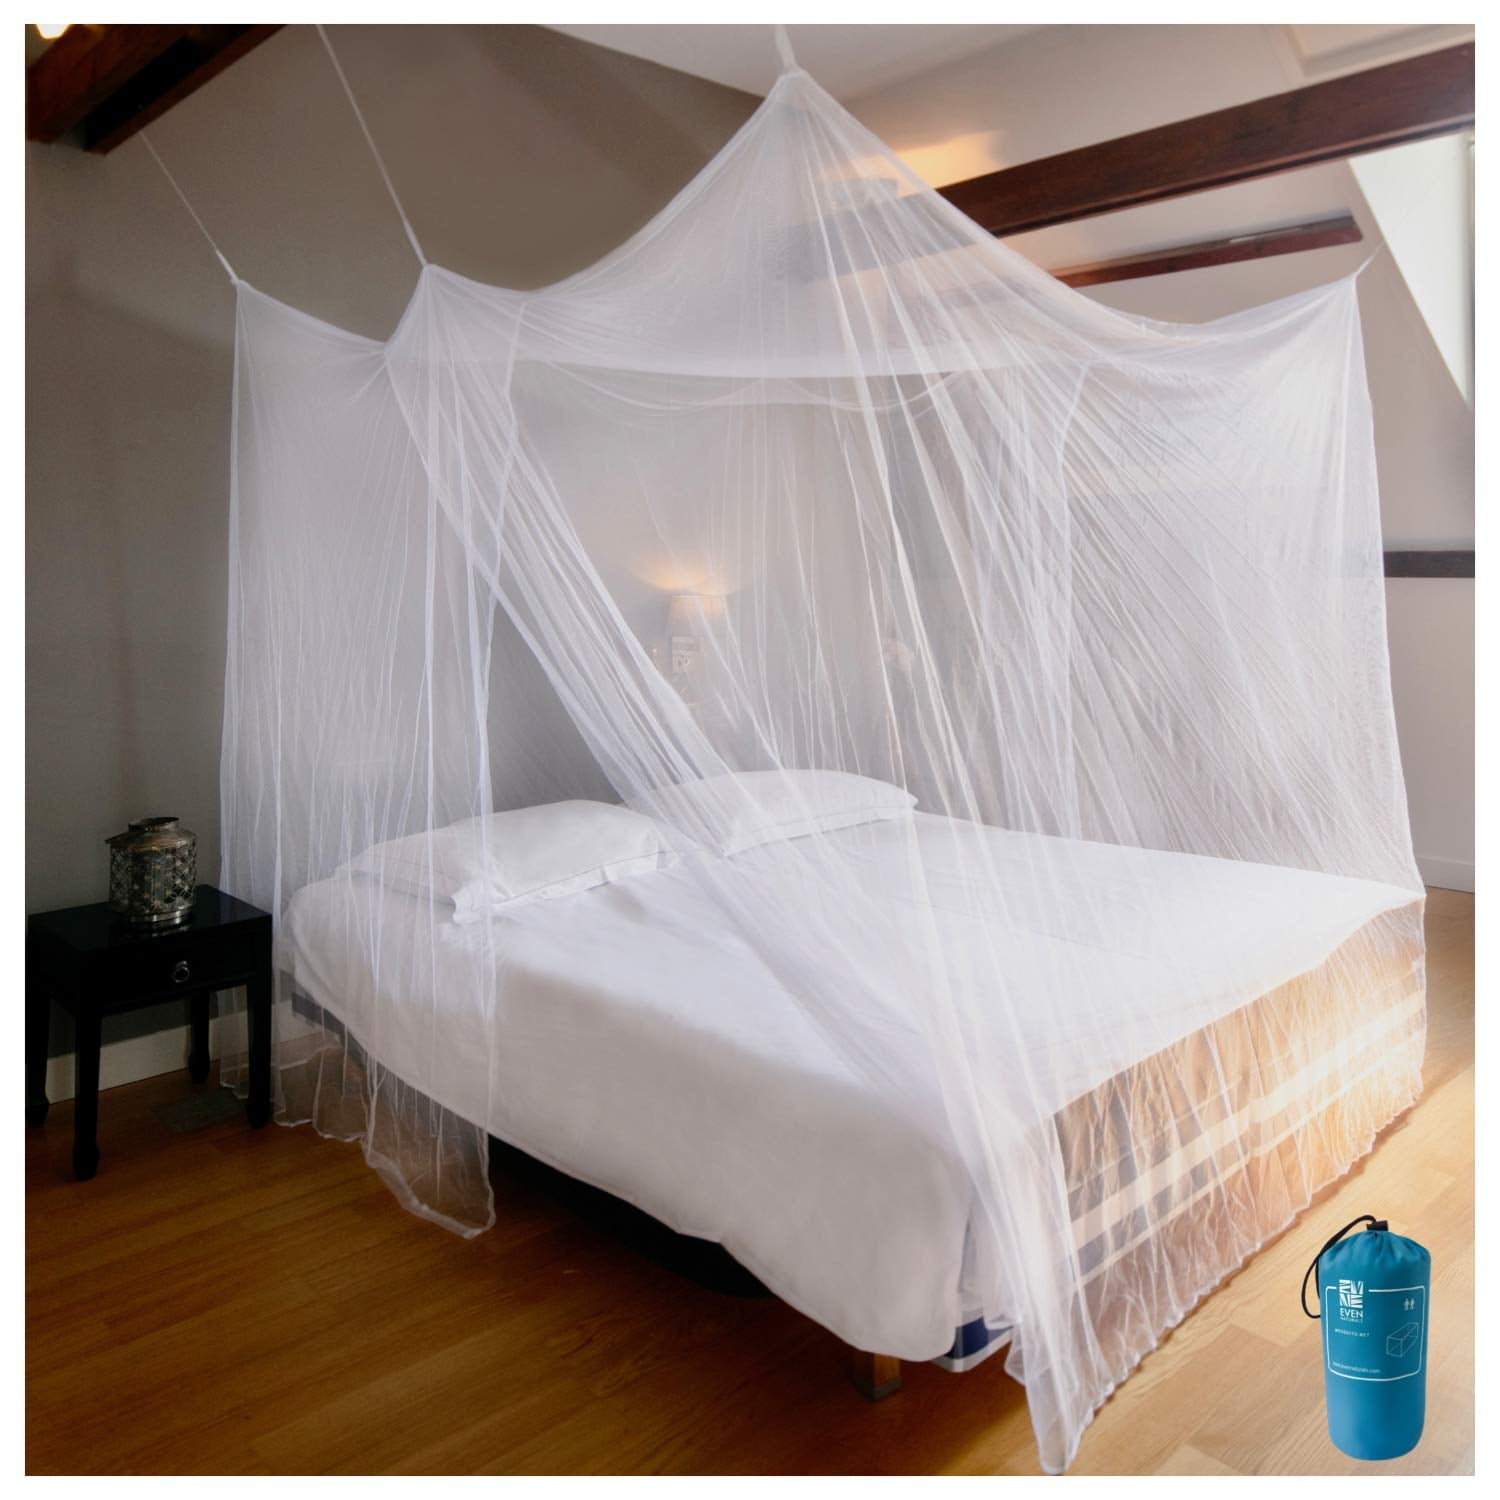 EVEN NATURALS Luxury Mosquito Net for Bed Canopy, XL Tent, Double